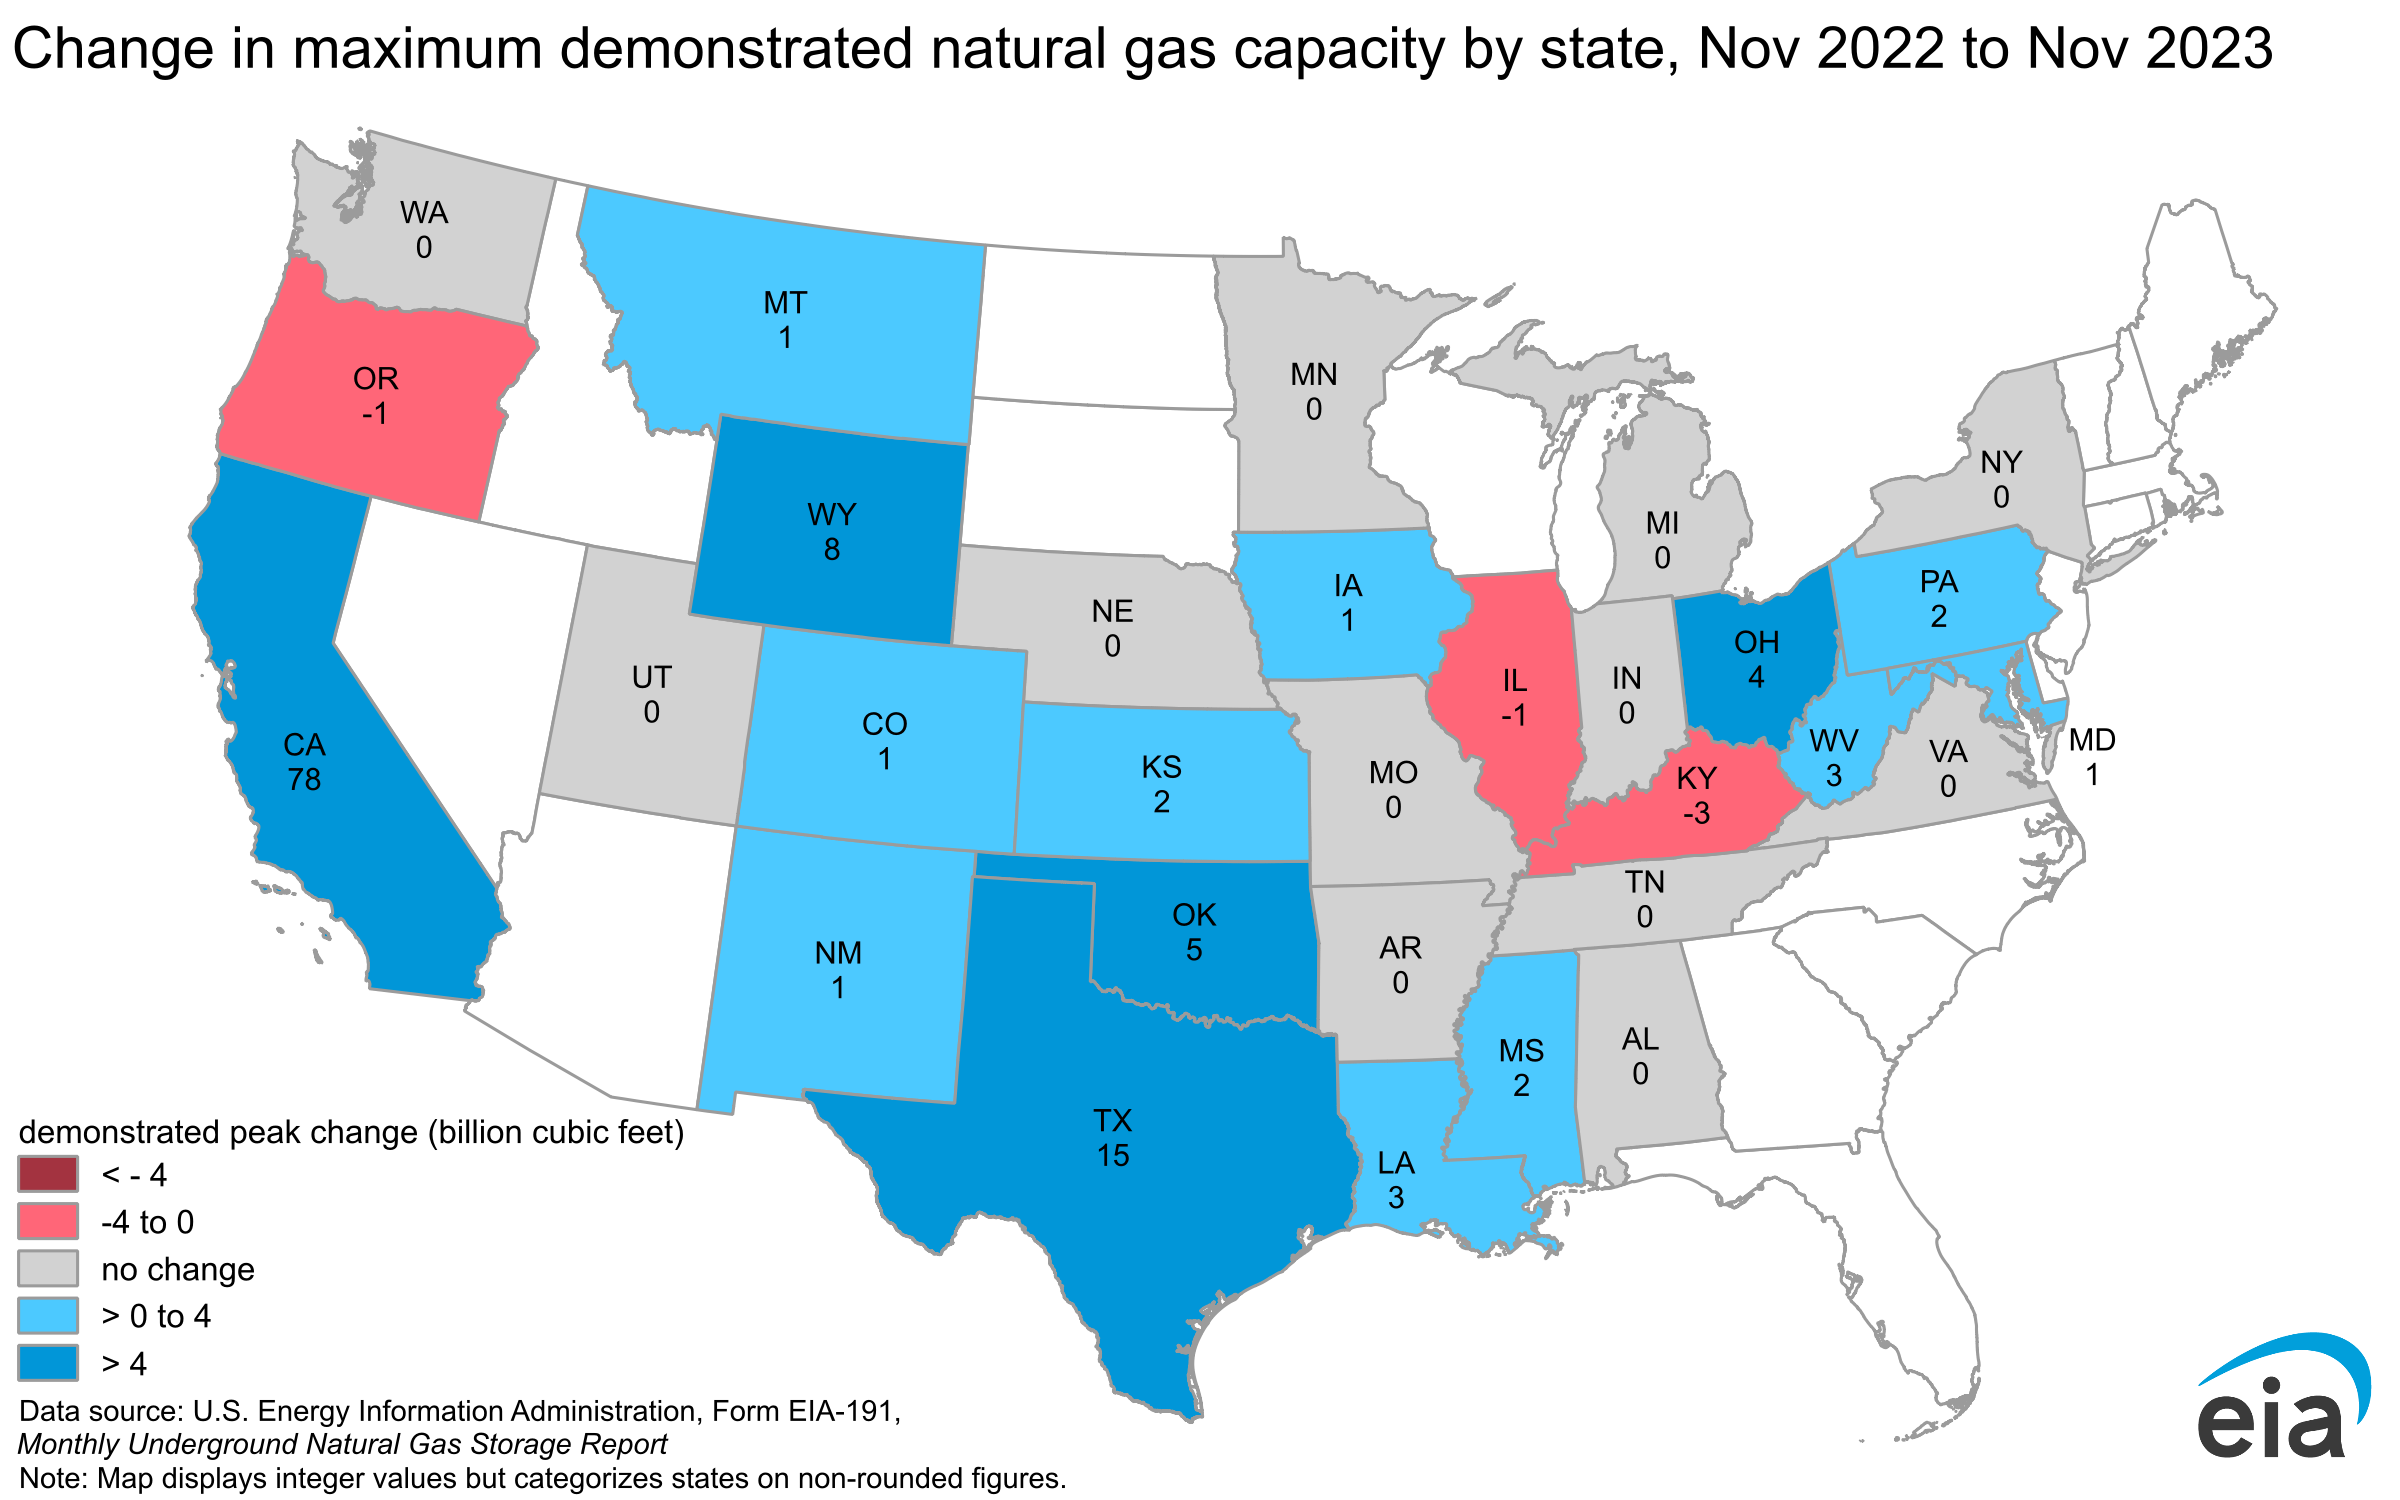 Change in maximum demonstrated natural gas capacity by state, Nov 2022 to Nov 2023